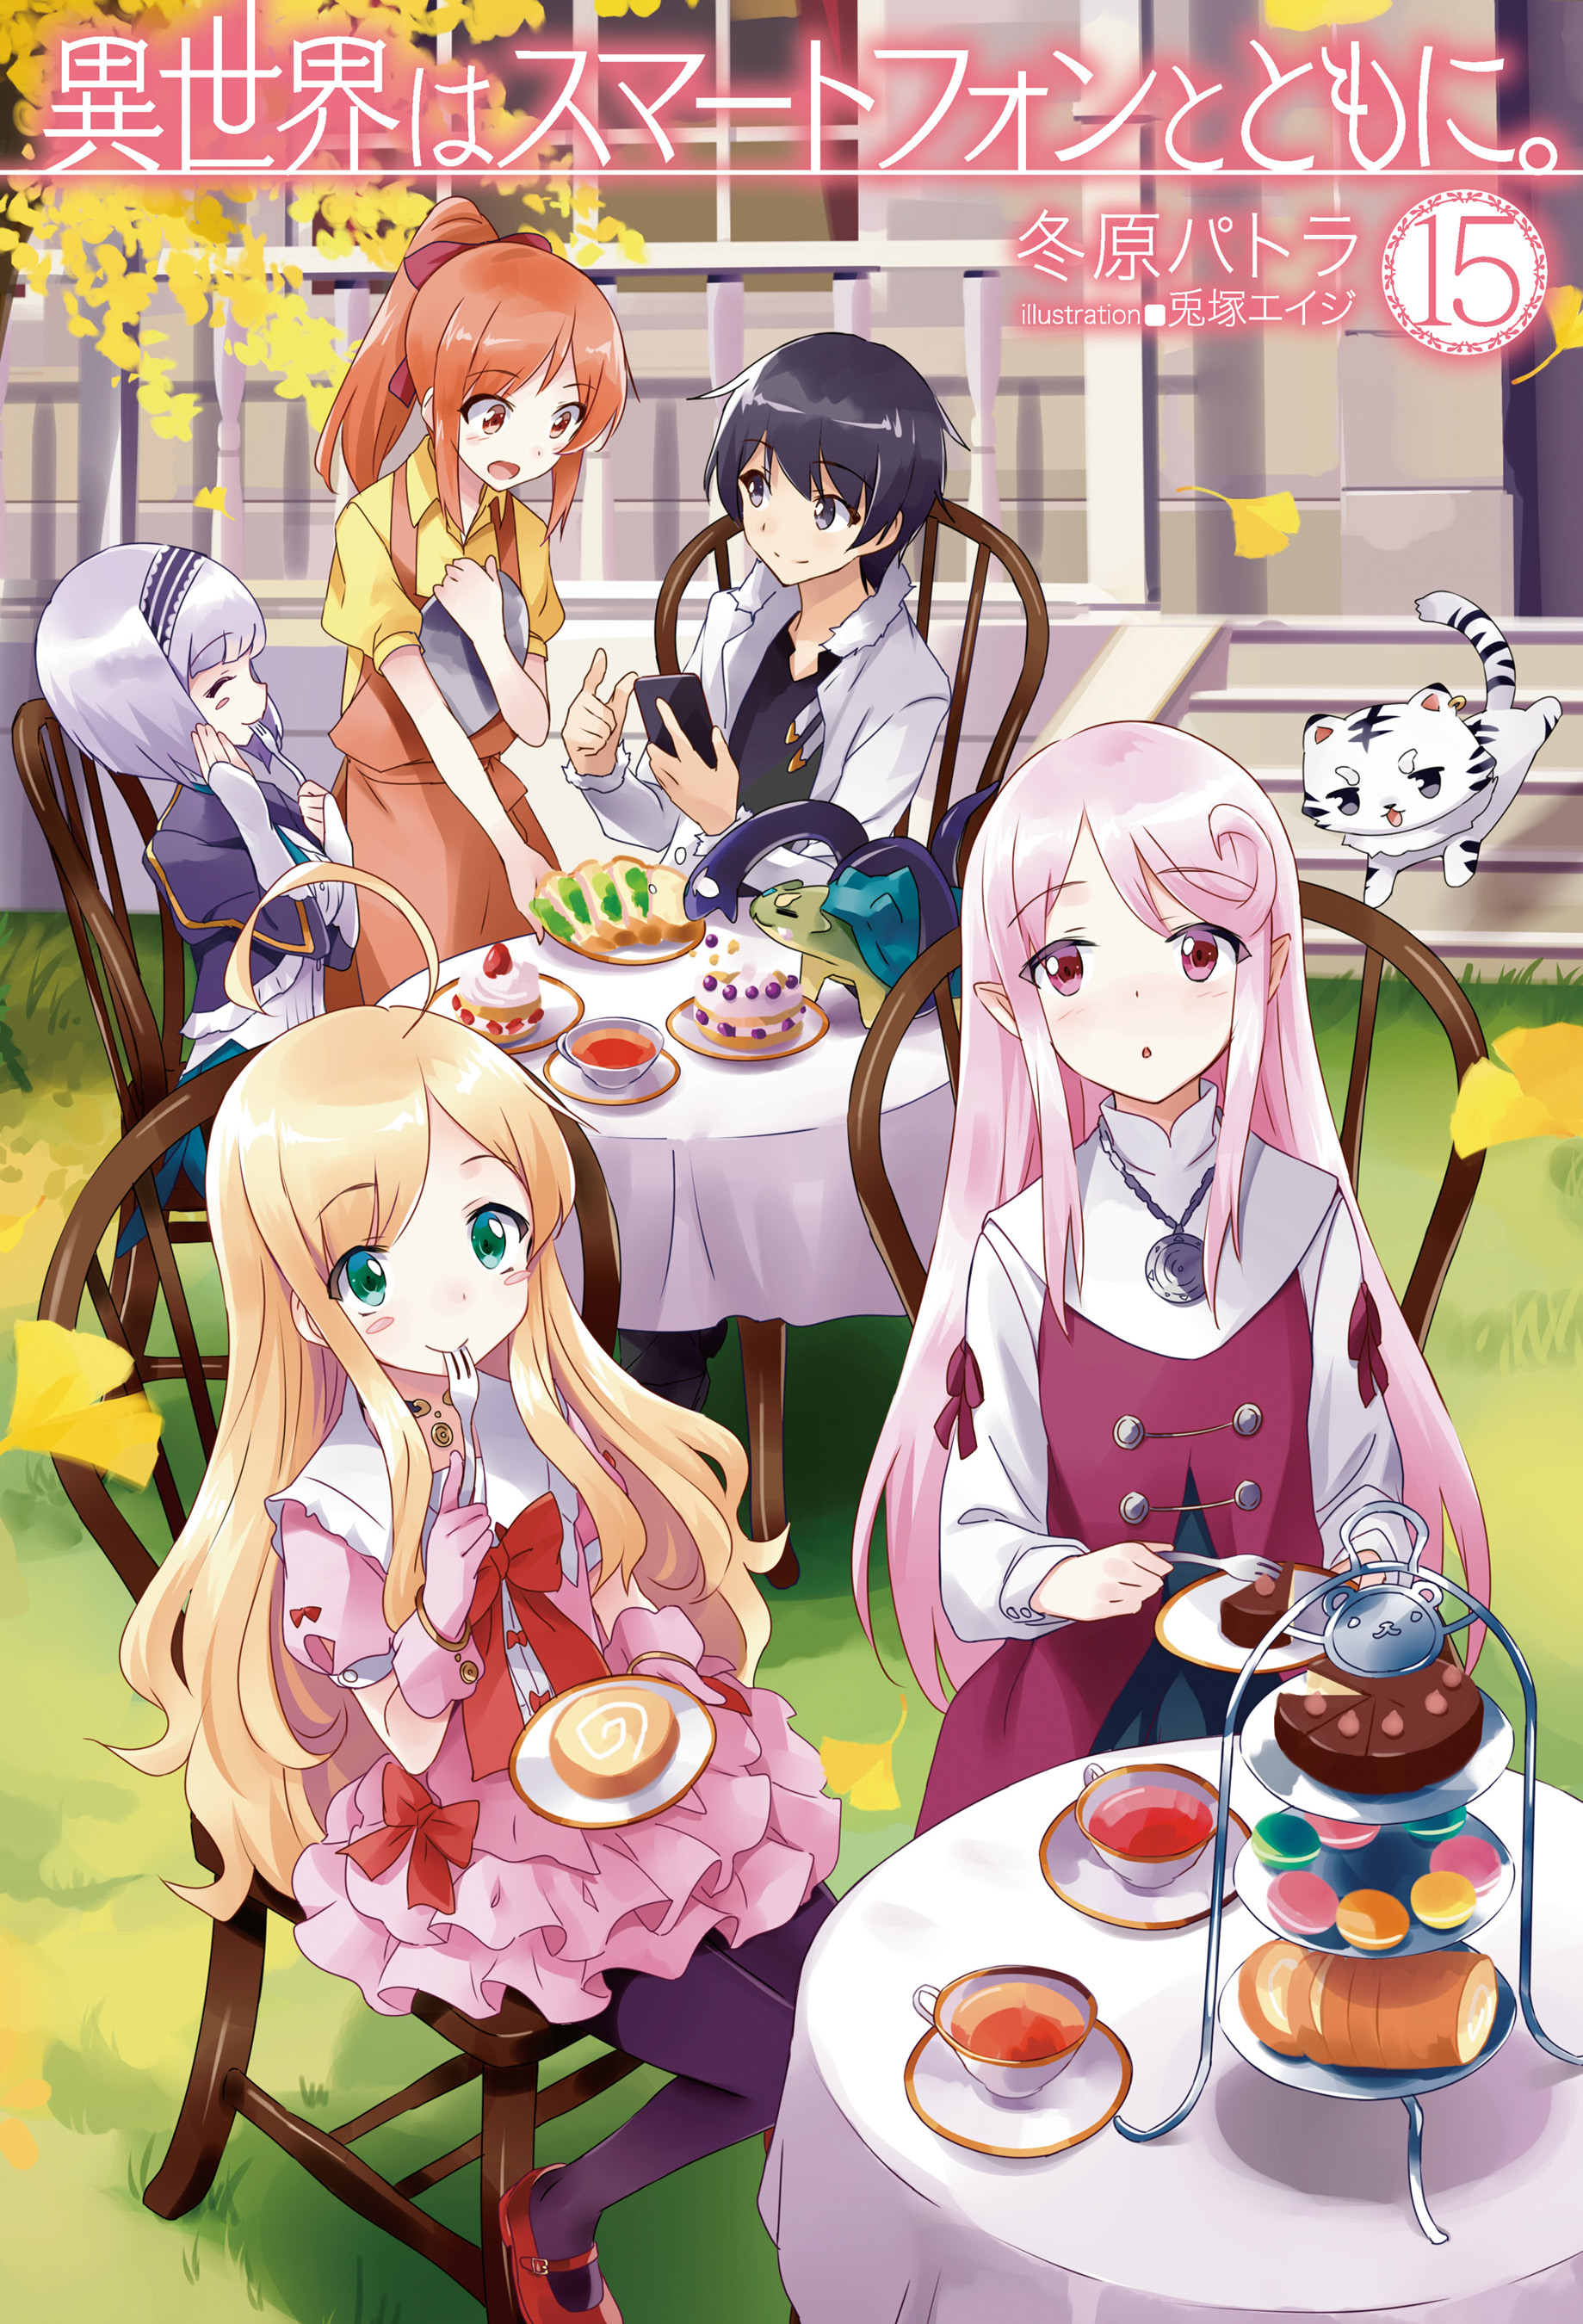 In Another World With My Smartphone Season 2 Ending Full -『Isekai  Jewelry』by Yumina, Linze & Elze 